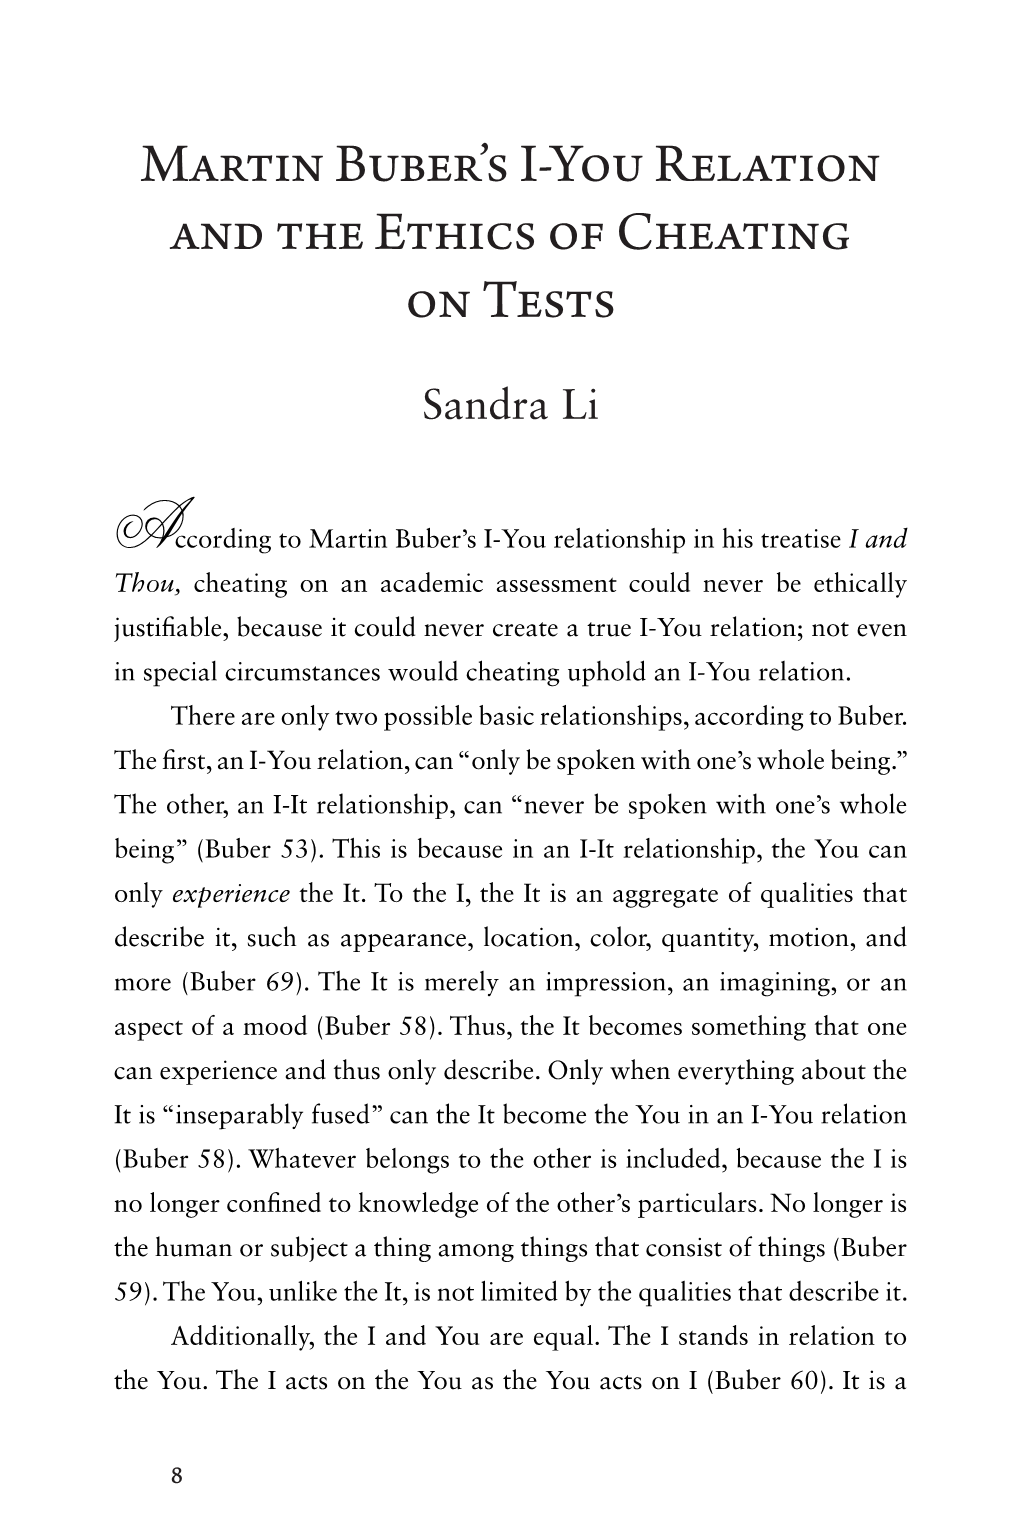 Martin Buber's I-You Relation and the Ethics of Cheating on Tests